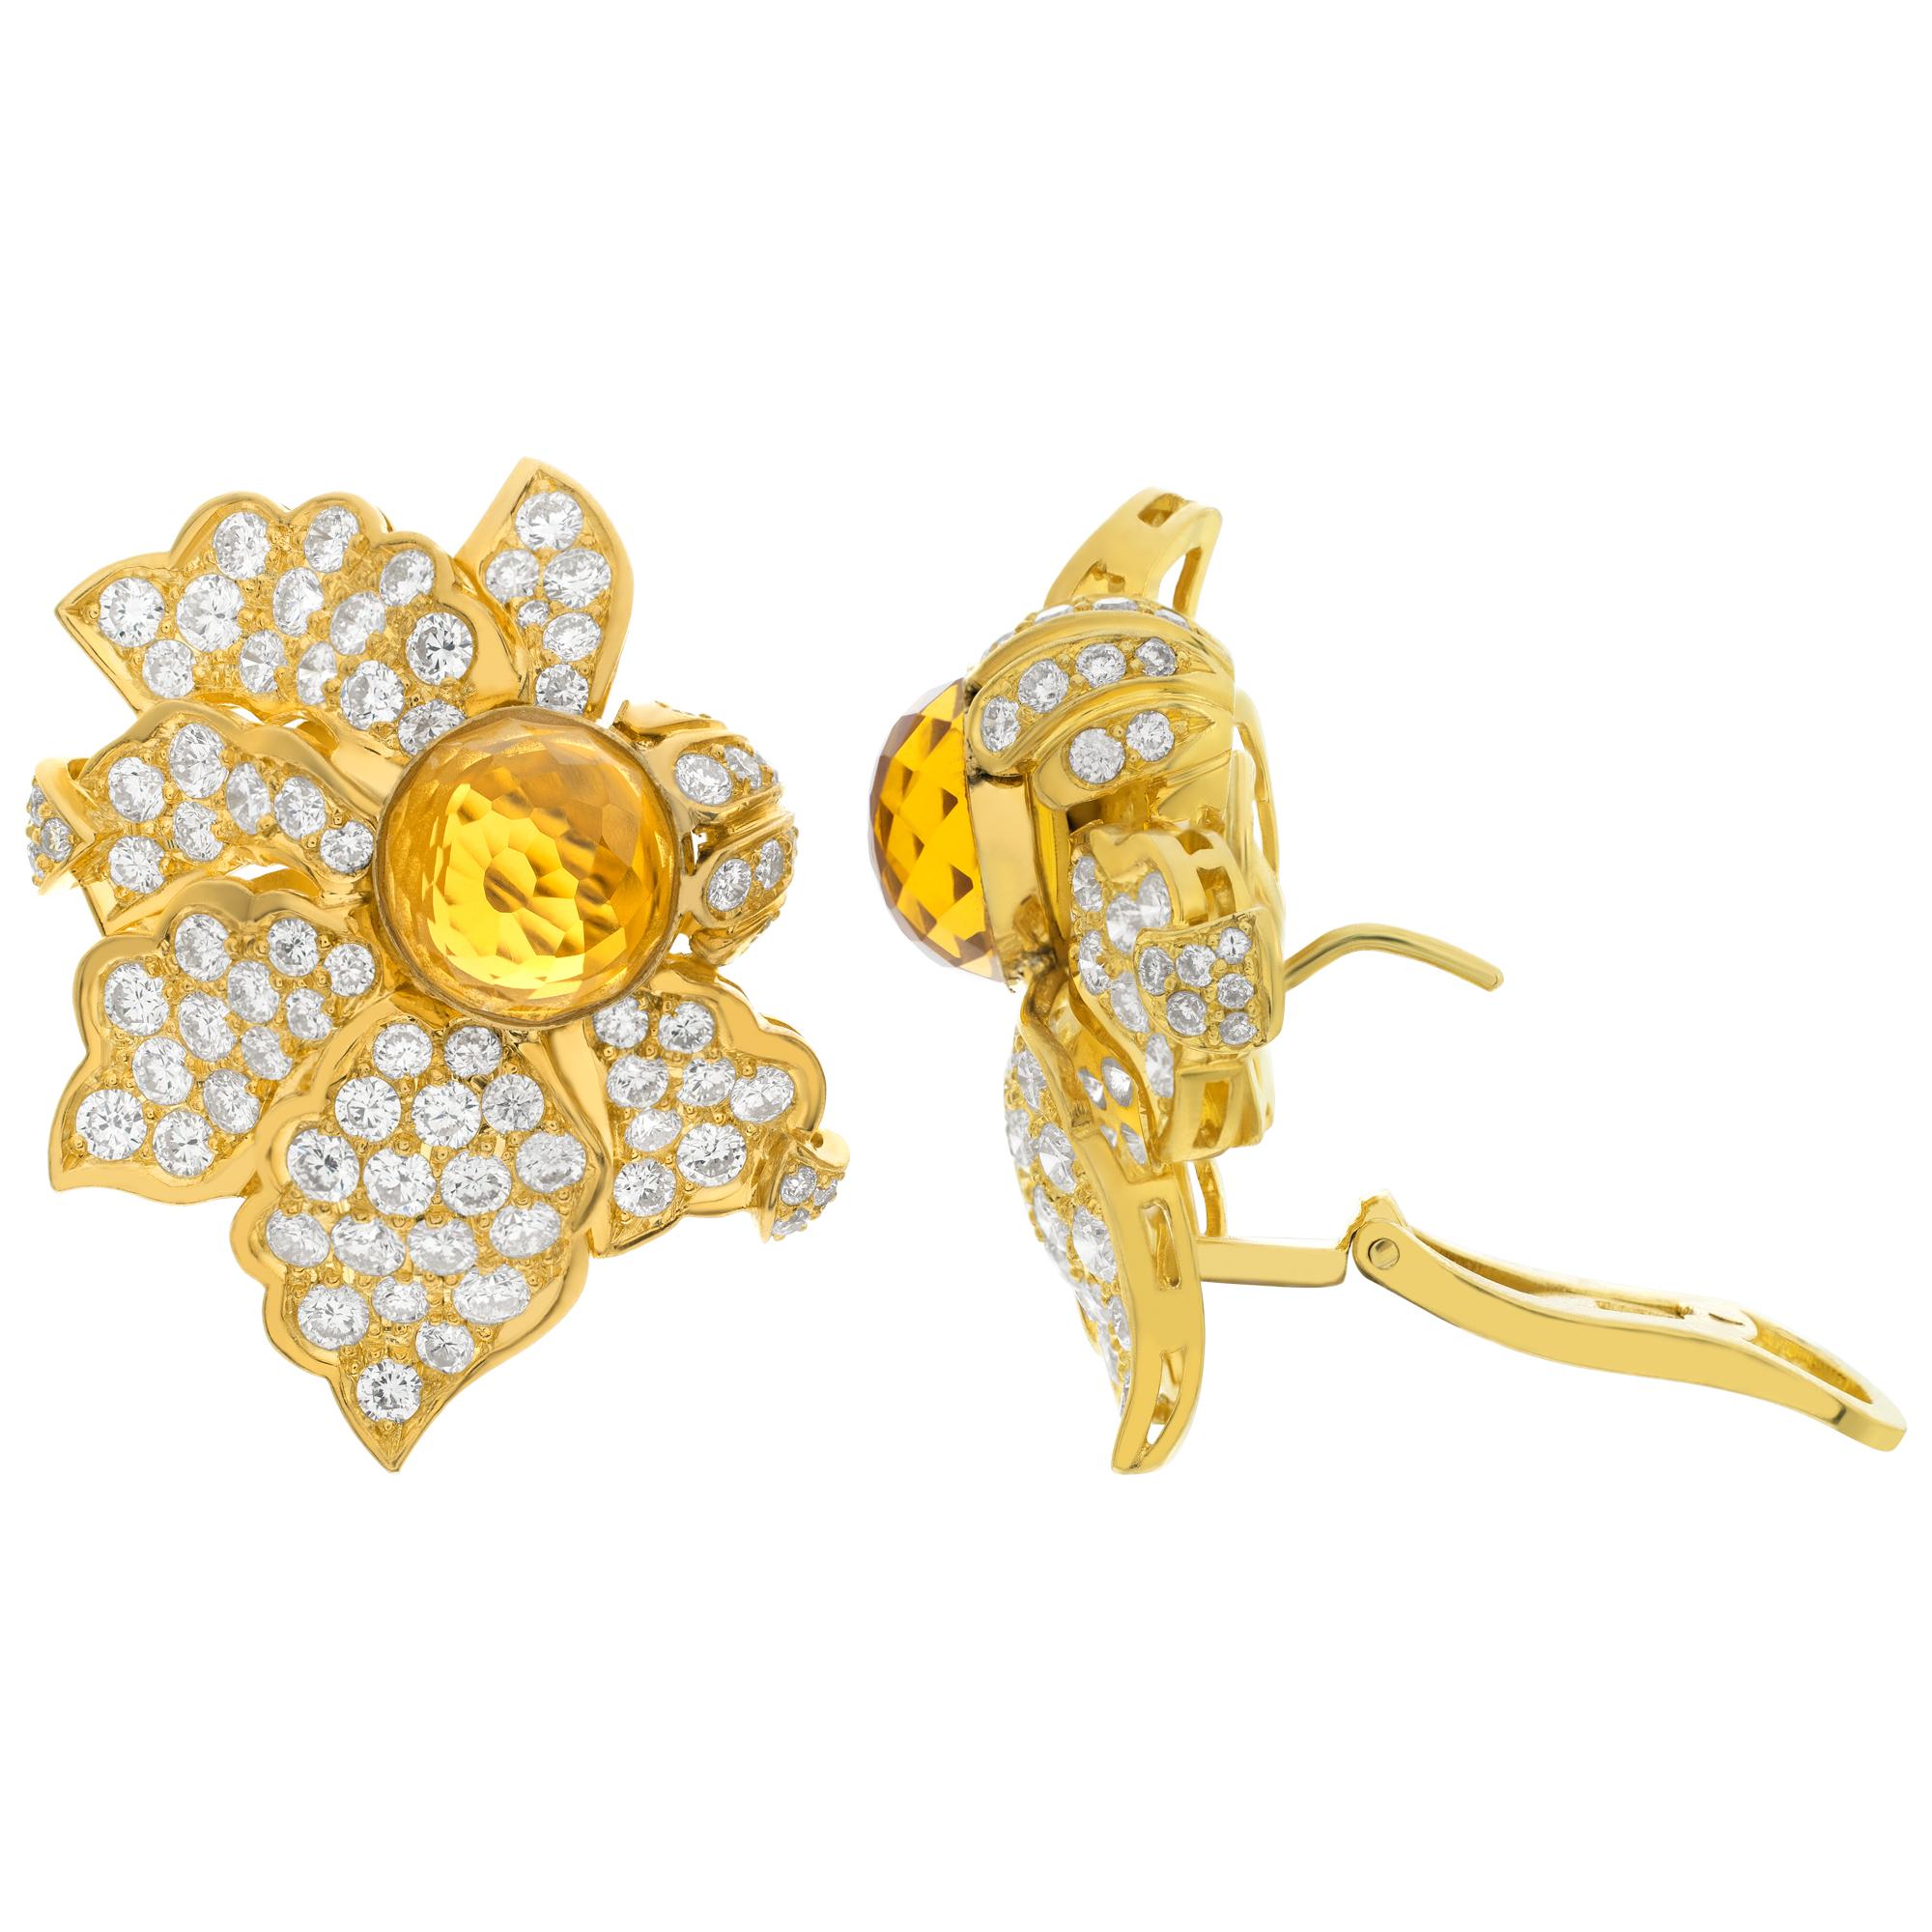 Yellow gold diamond flower earrings with Brazilian orange Citrine center In Excellent Condition For Sale In Surfside, FL